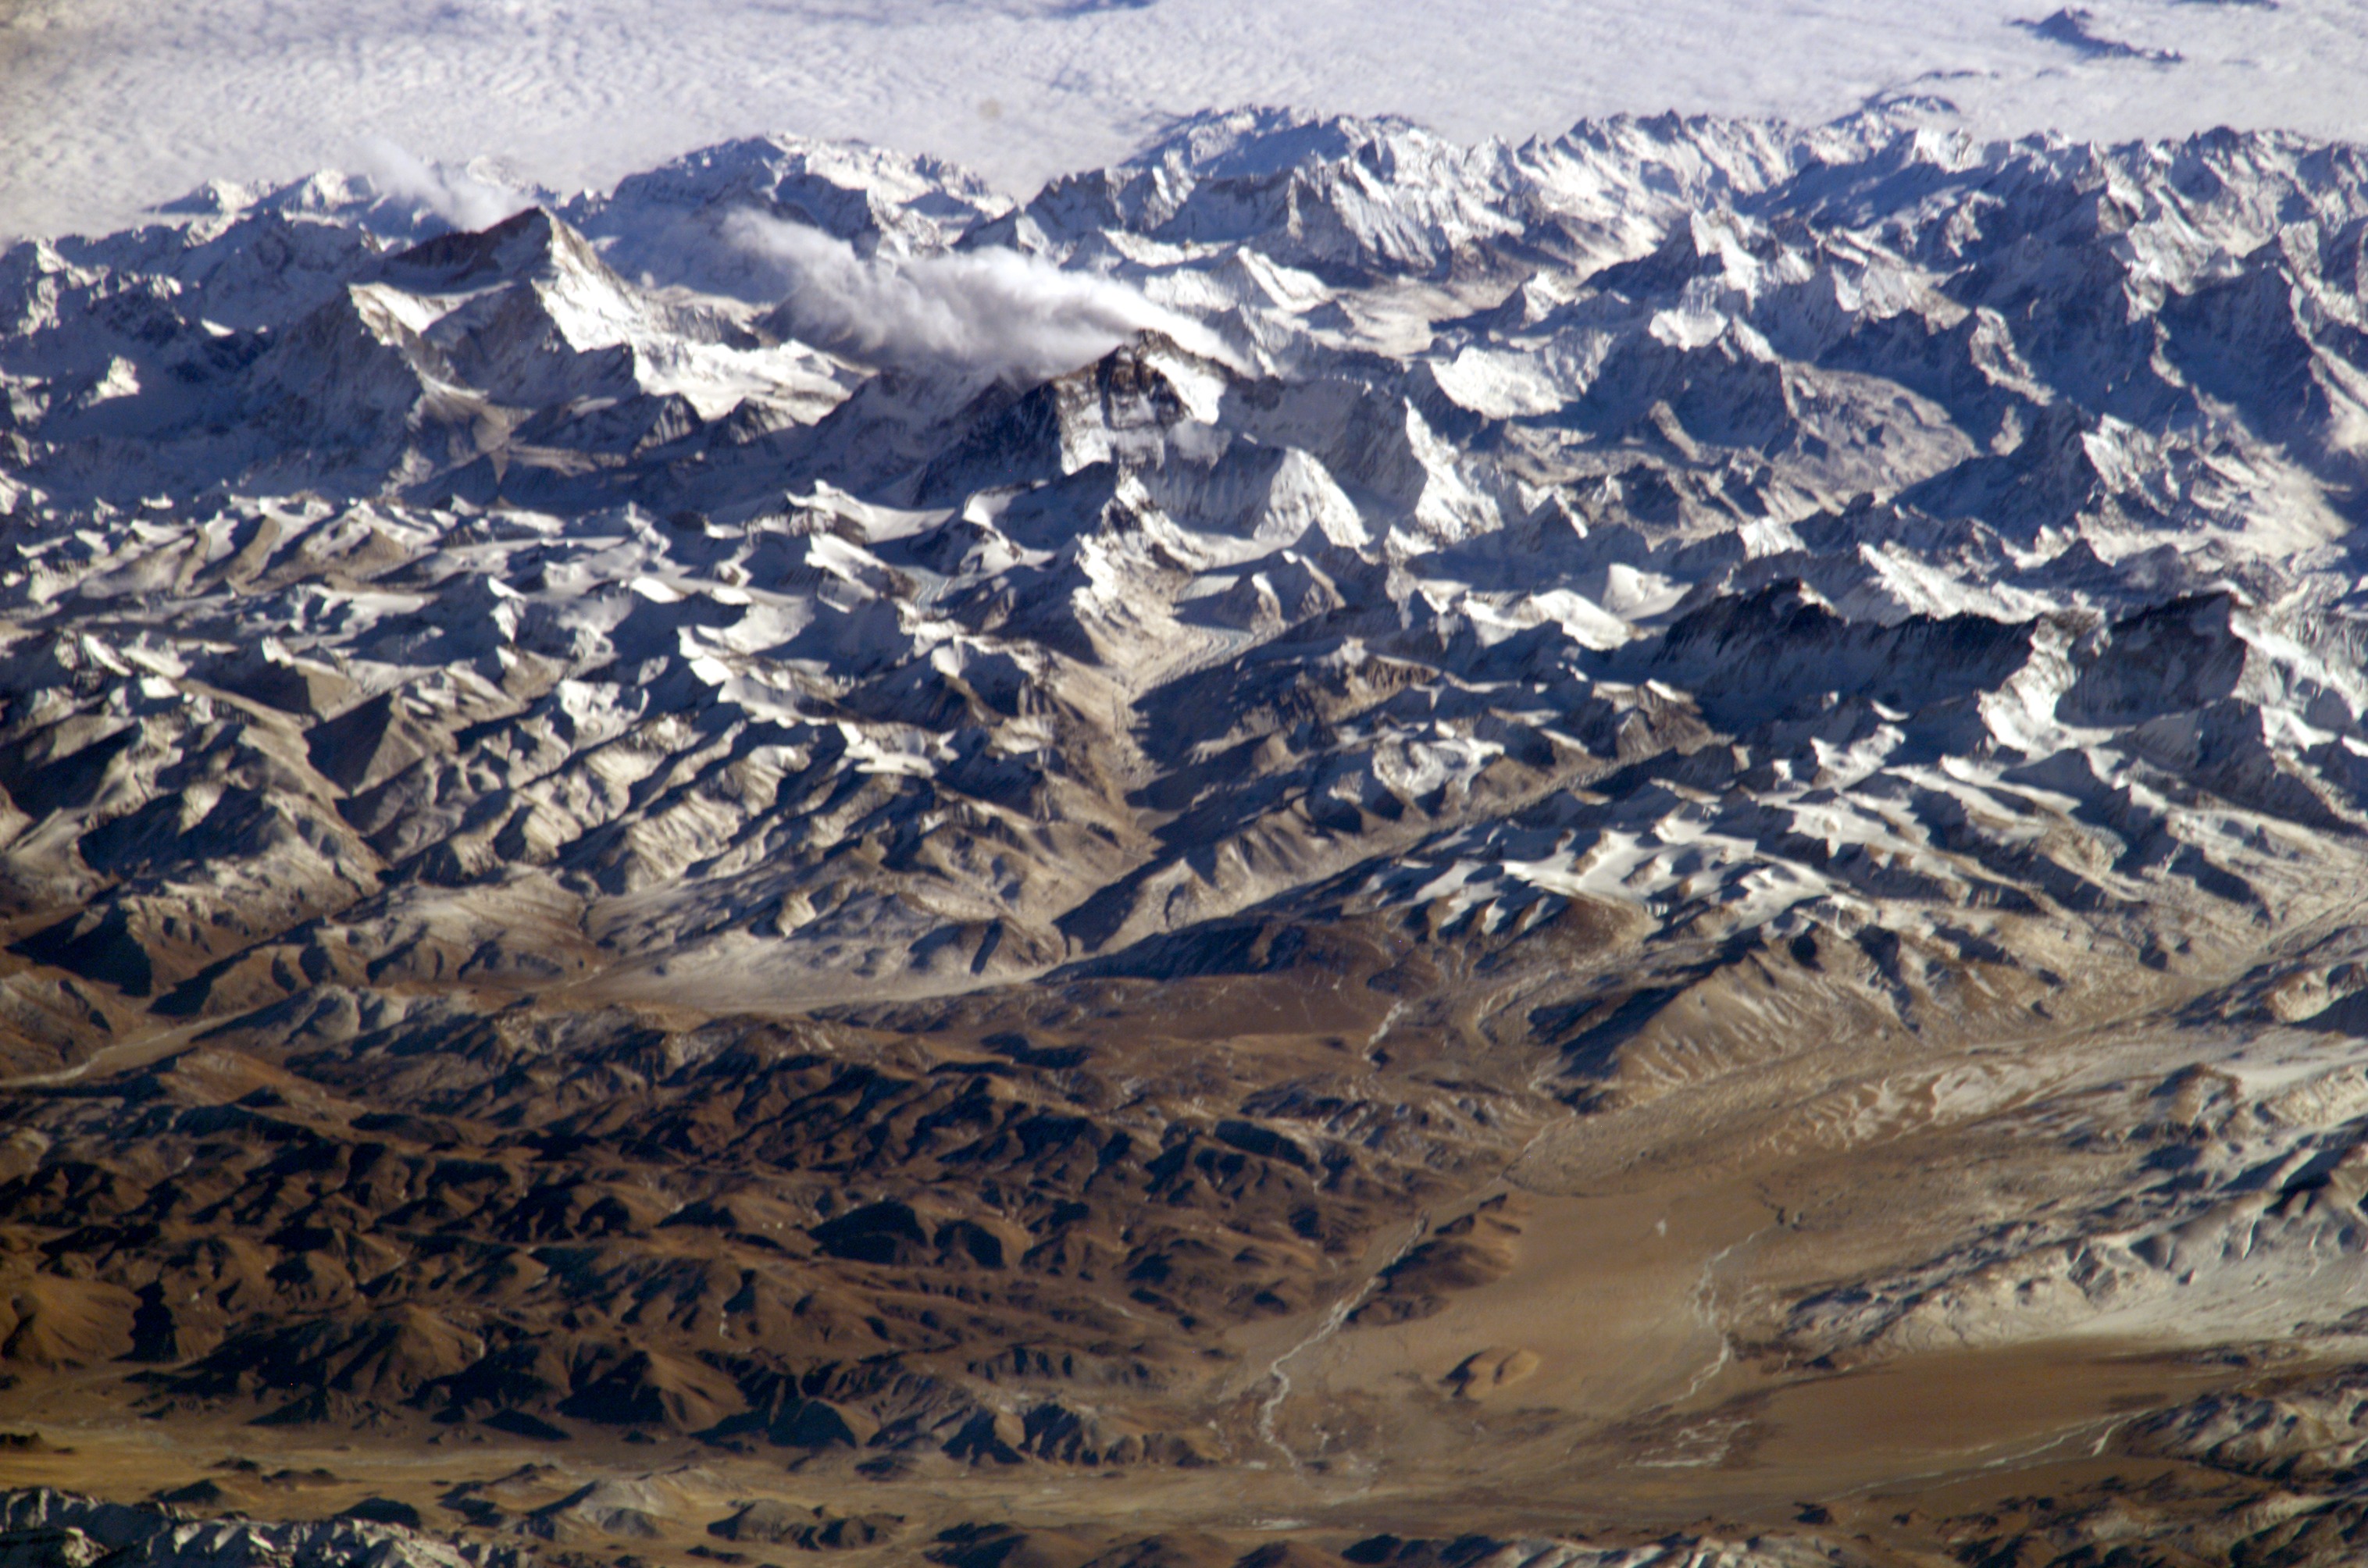 Mt Everest as seen from 200 miles up from SpaceShuttle.